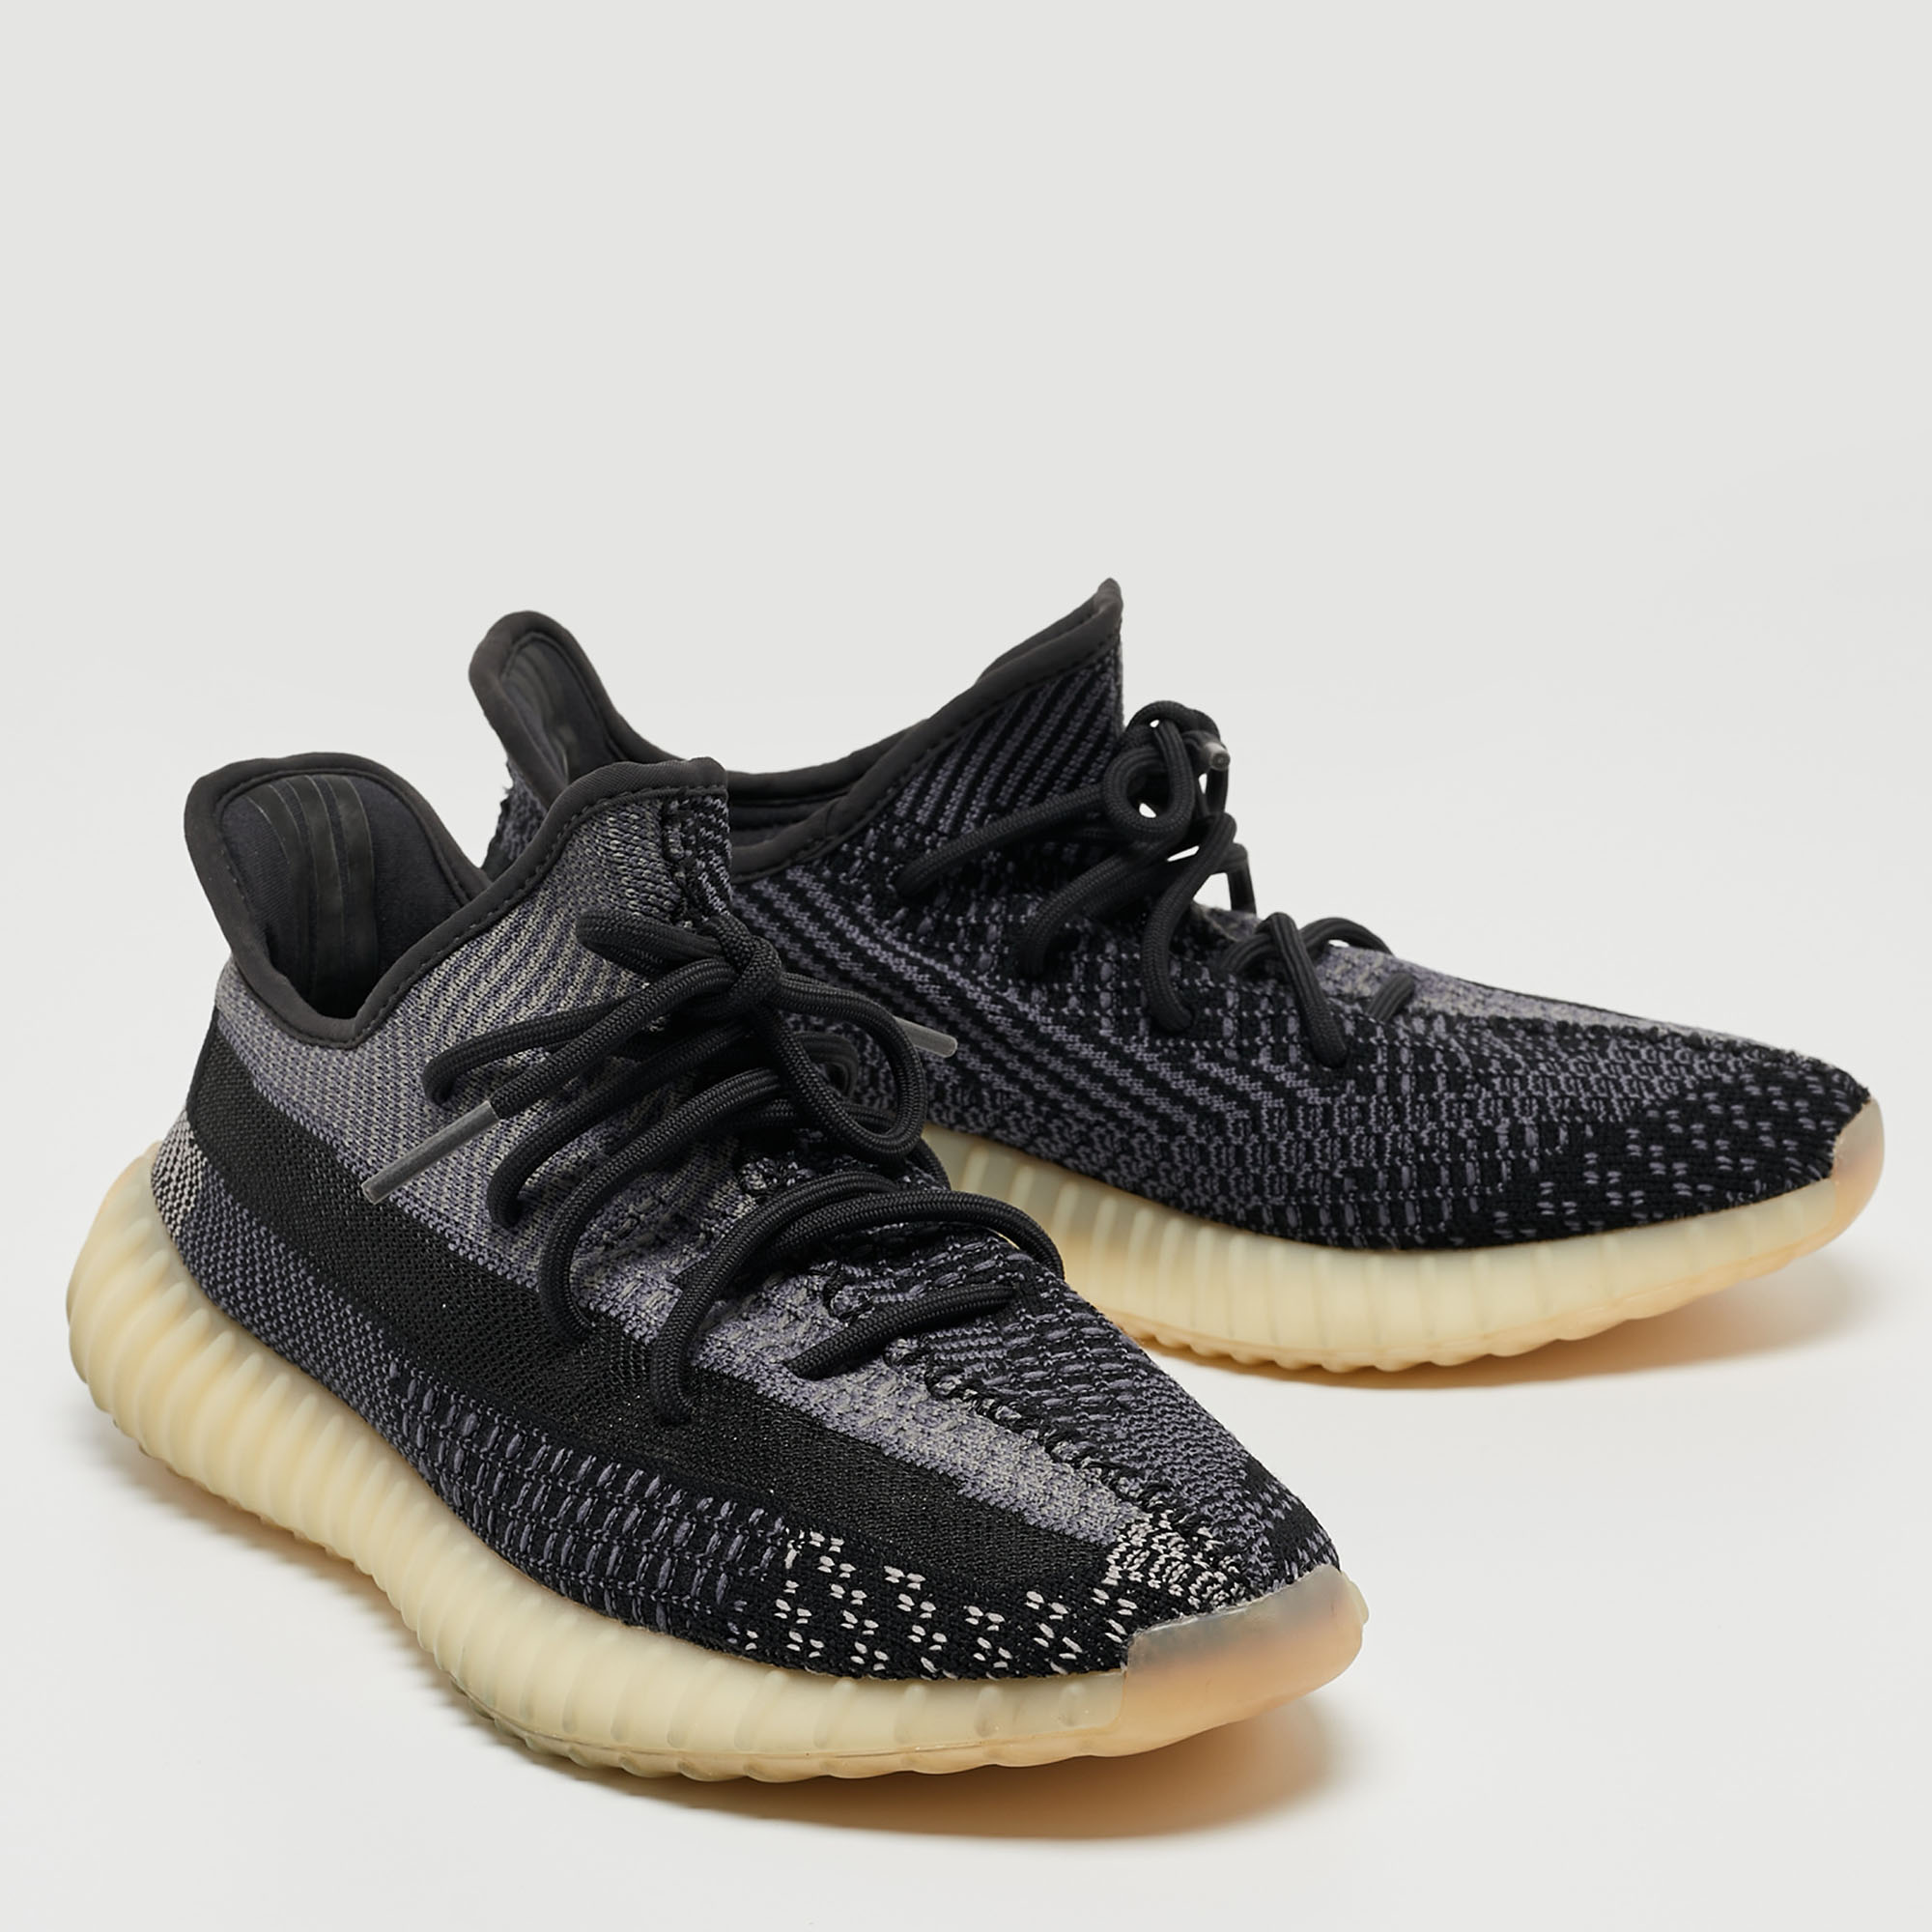 Adidas X Yeezy Black/Blue Knit Fabric Boost-350-v2-carbon Sneakers Size 43 1/3